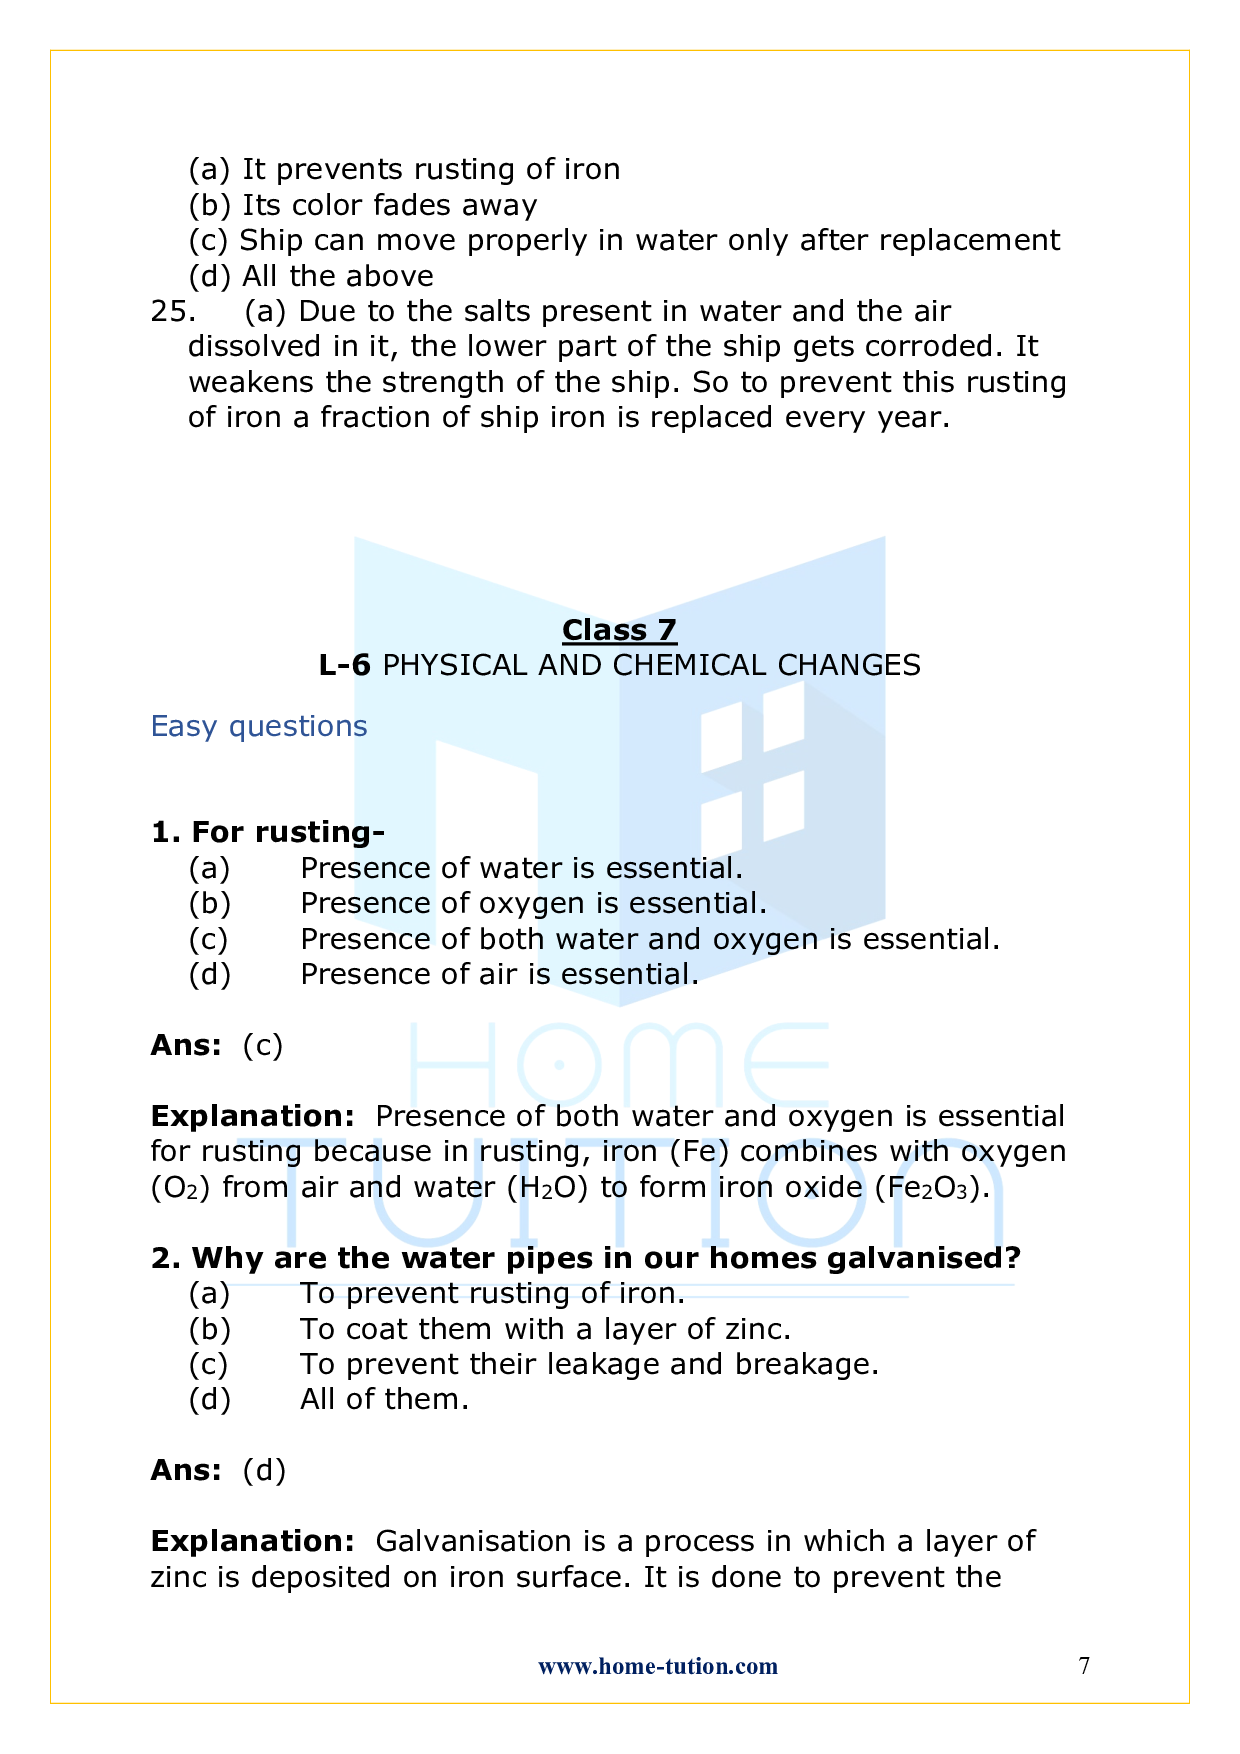 Chapter 6- Physical and Chemical Changes